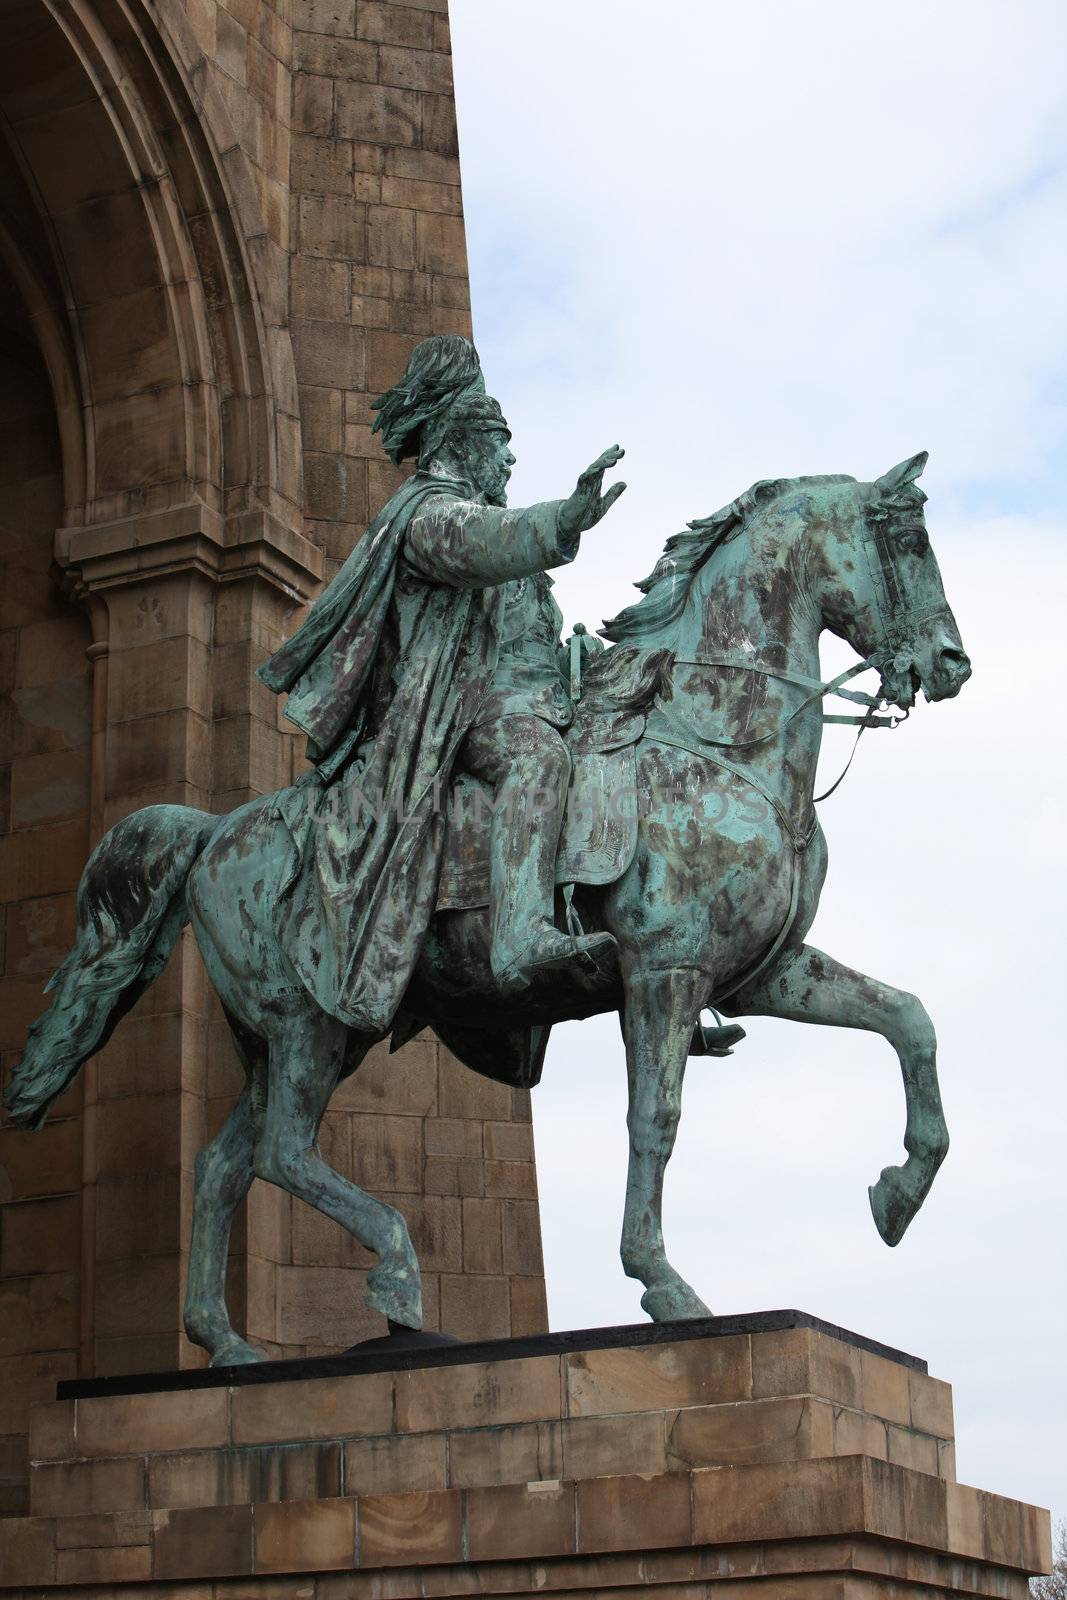 Low angle view of a bronze statue of Kaiser Wilhelm mounted on horseback with his hand raised in greeting